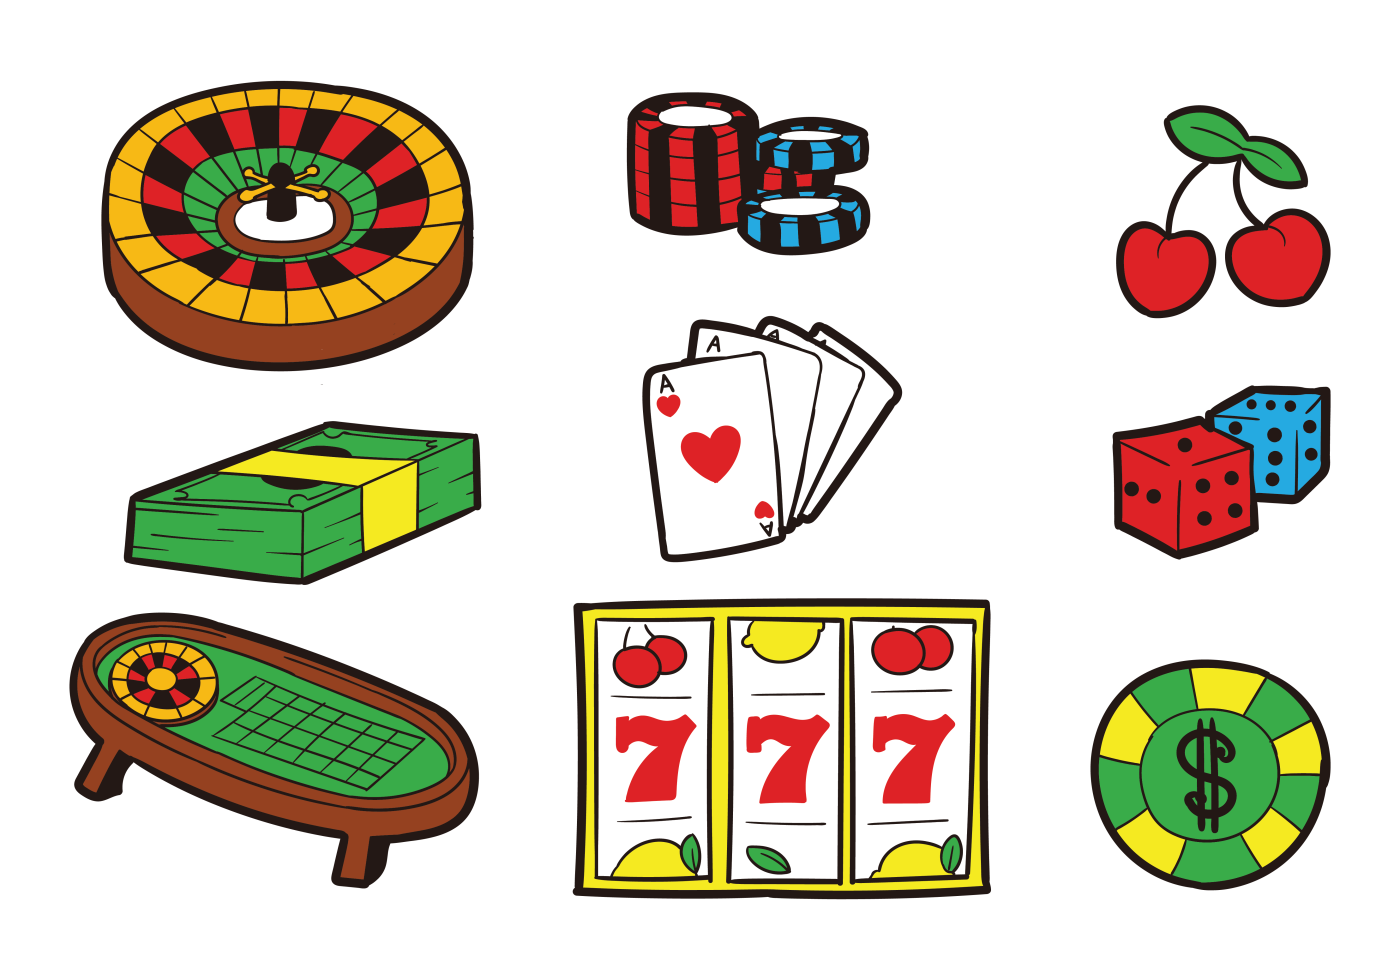 Roulette Table Icons Vector - Download Free Vectors, Clipart Graphics & Vector Art1400 x 980